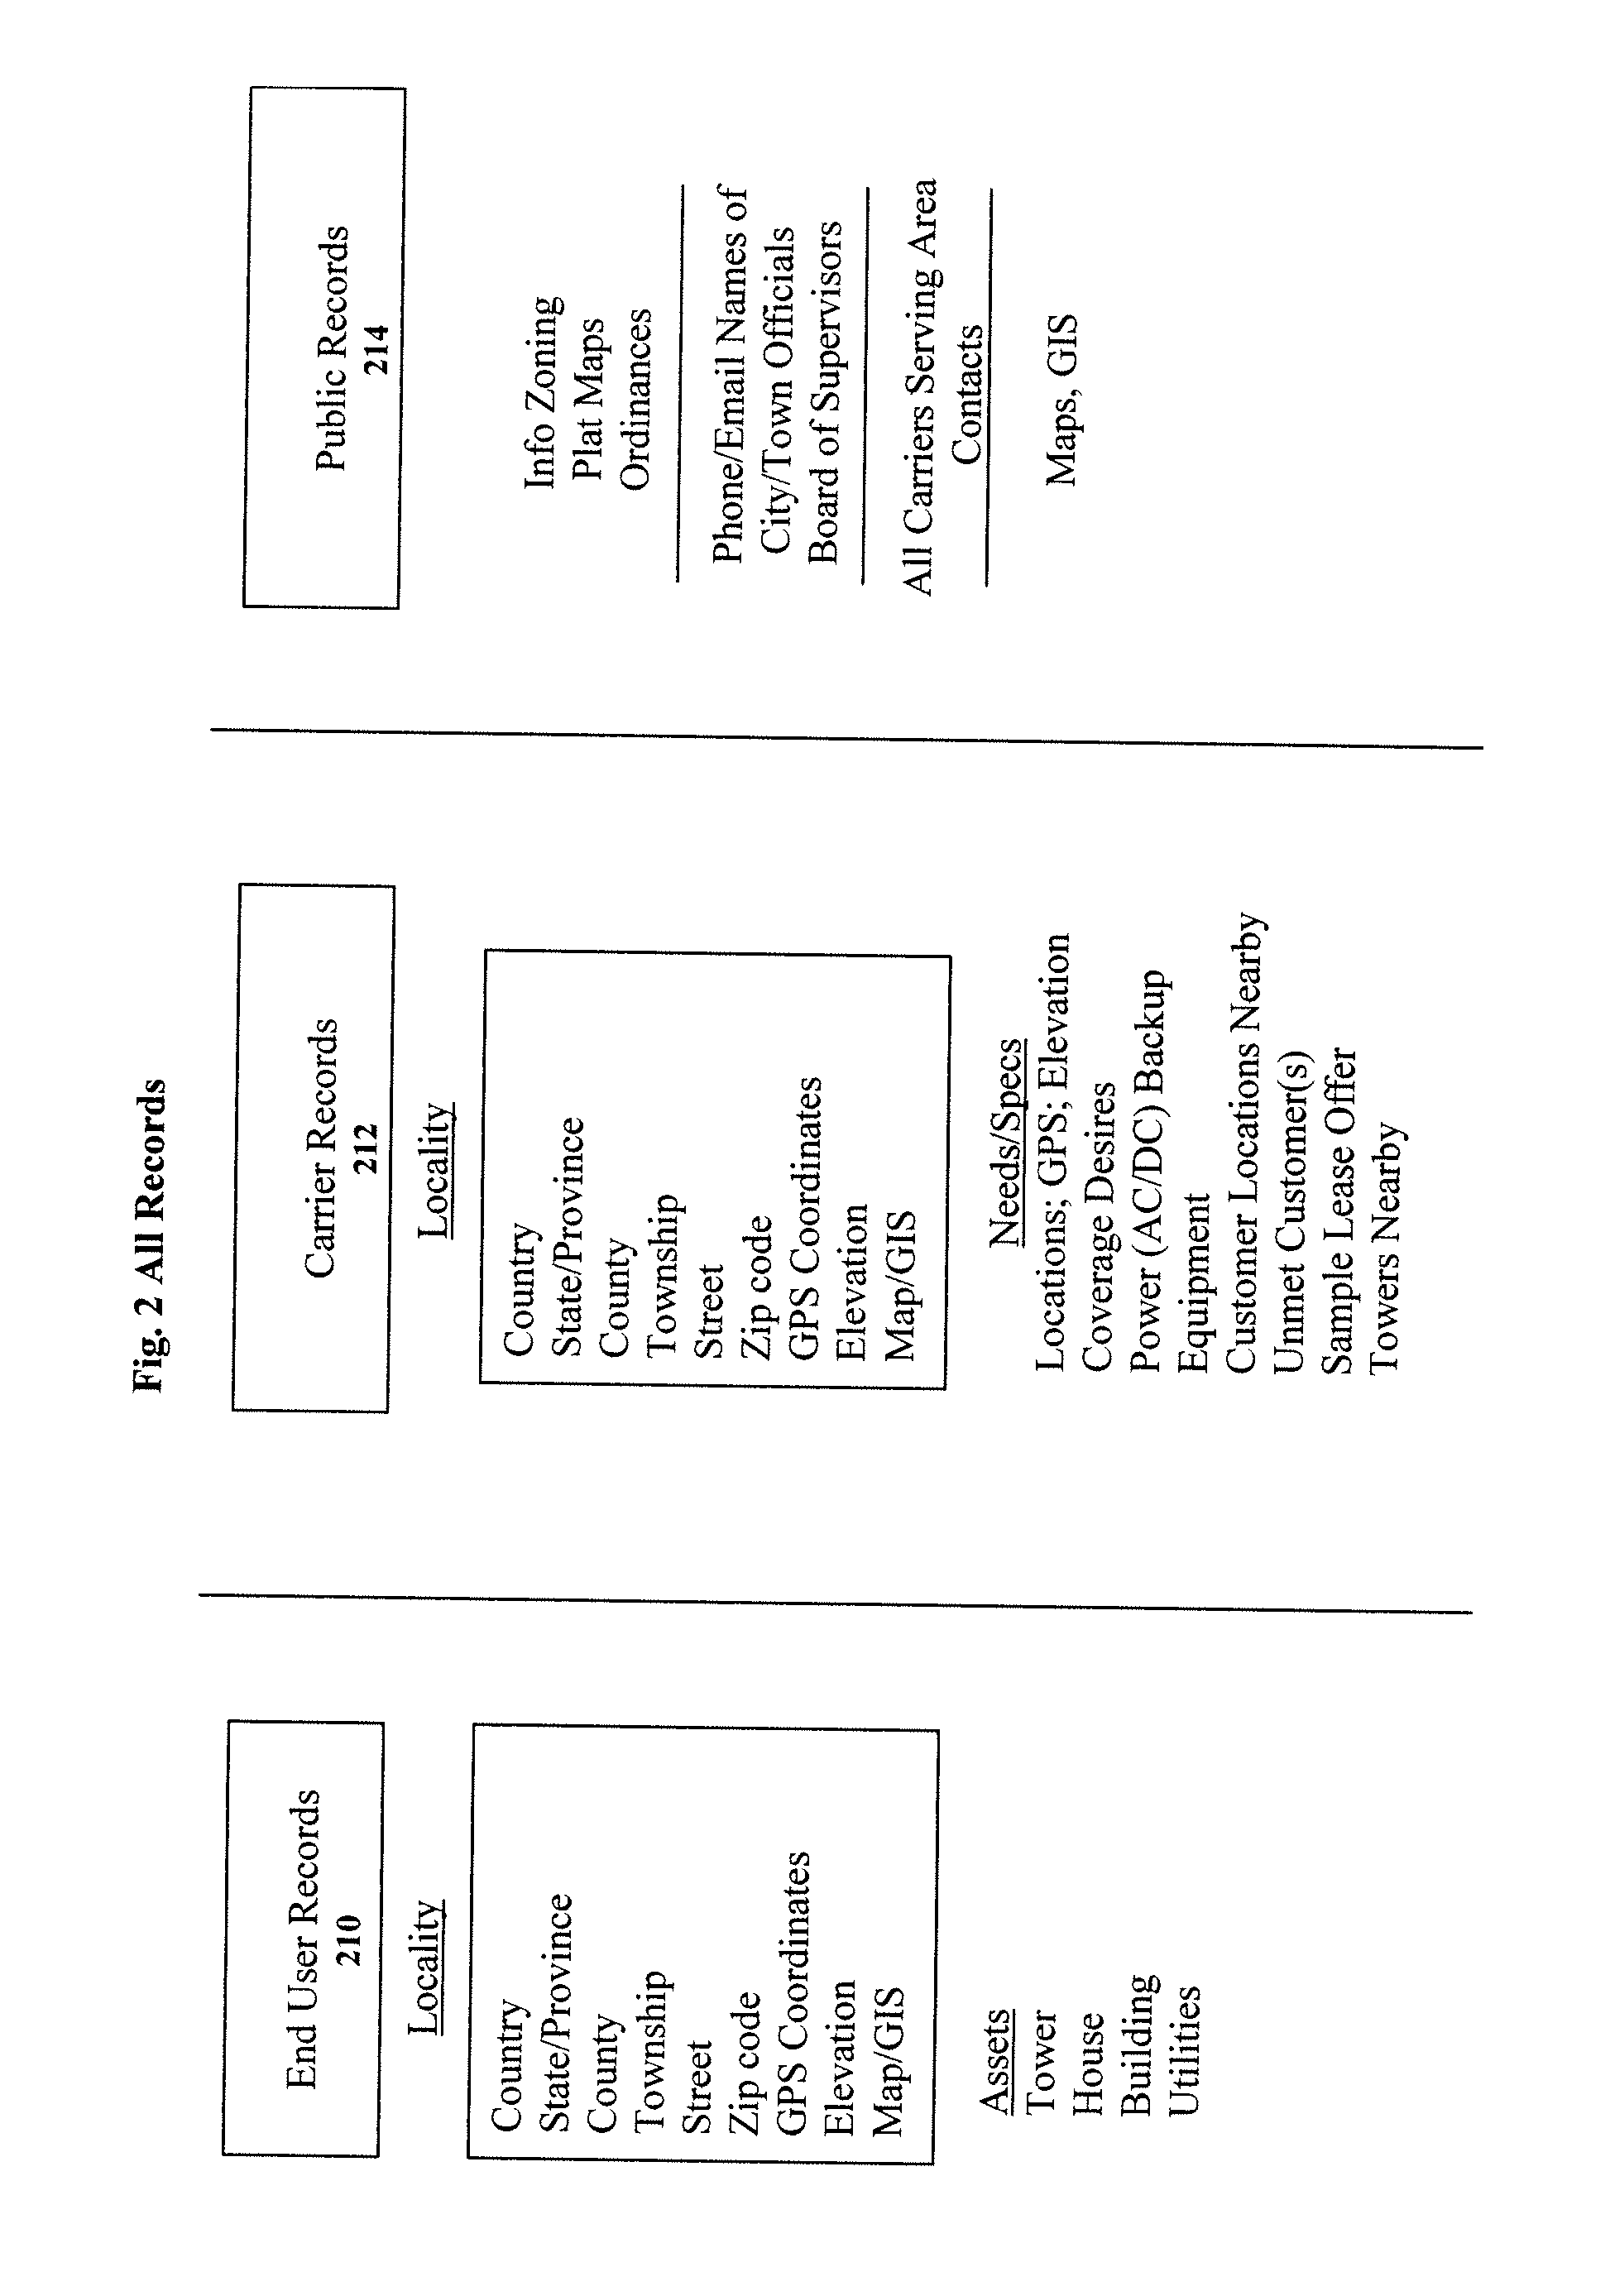 Clearinghouse System and Method for Determining Availability of Carrier-Based Services and Enhancing the Quality, Operation and Accessibility of Carrier-Based Networks